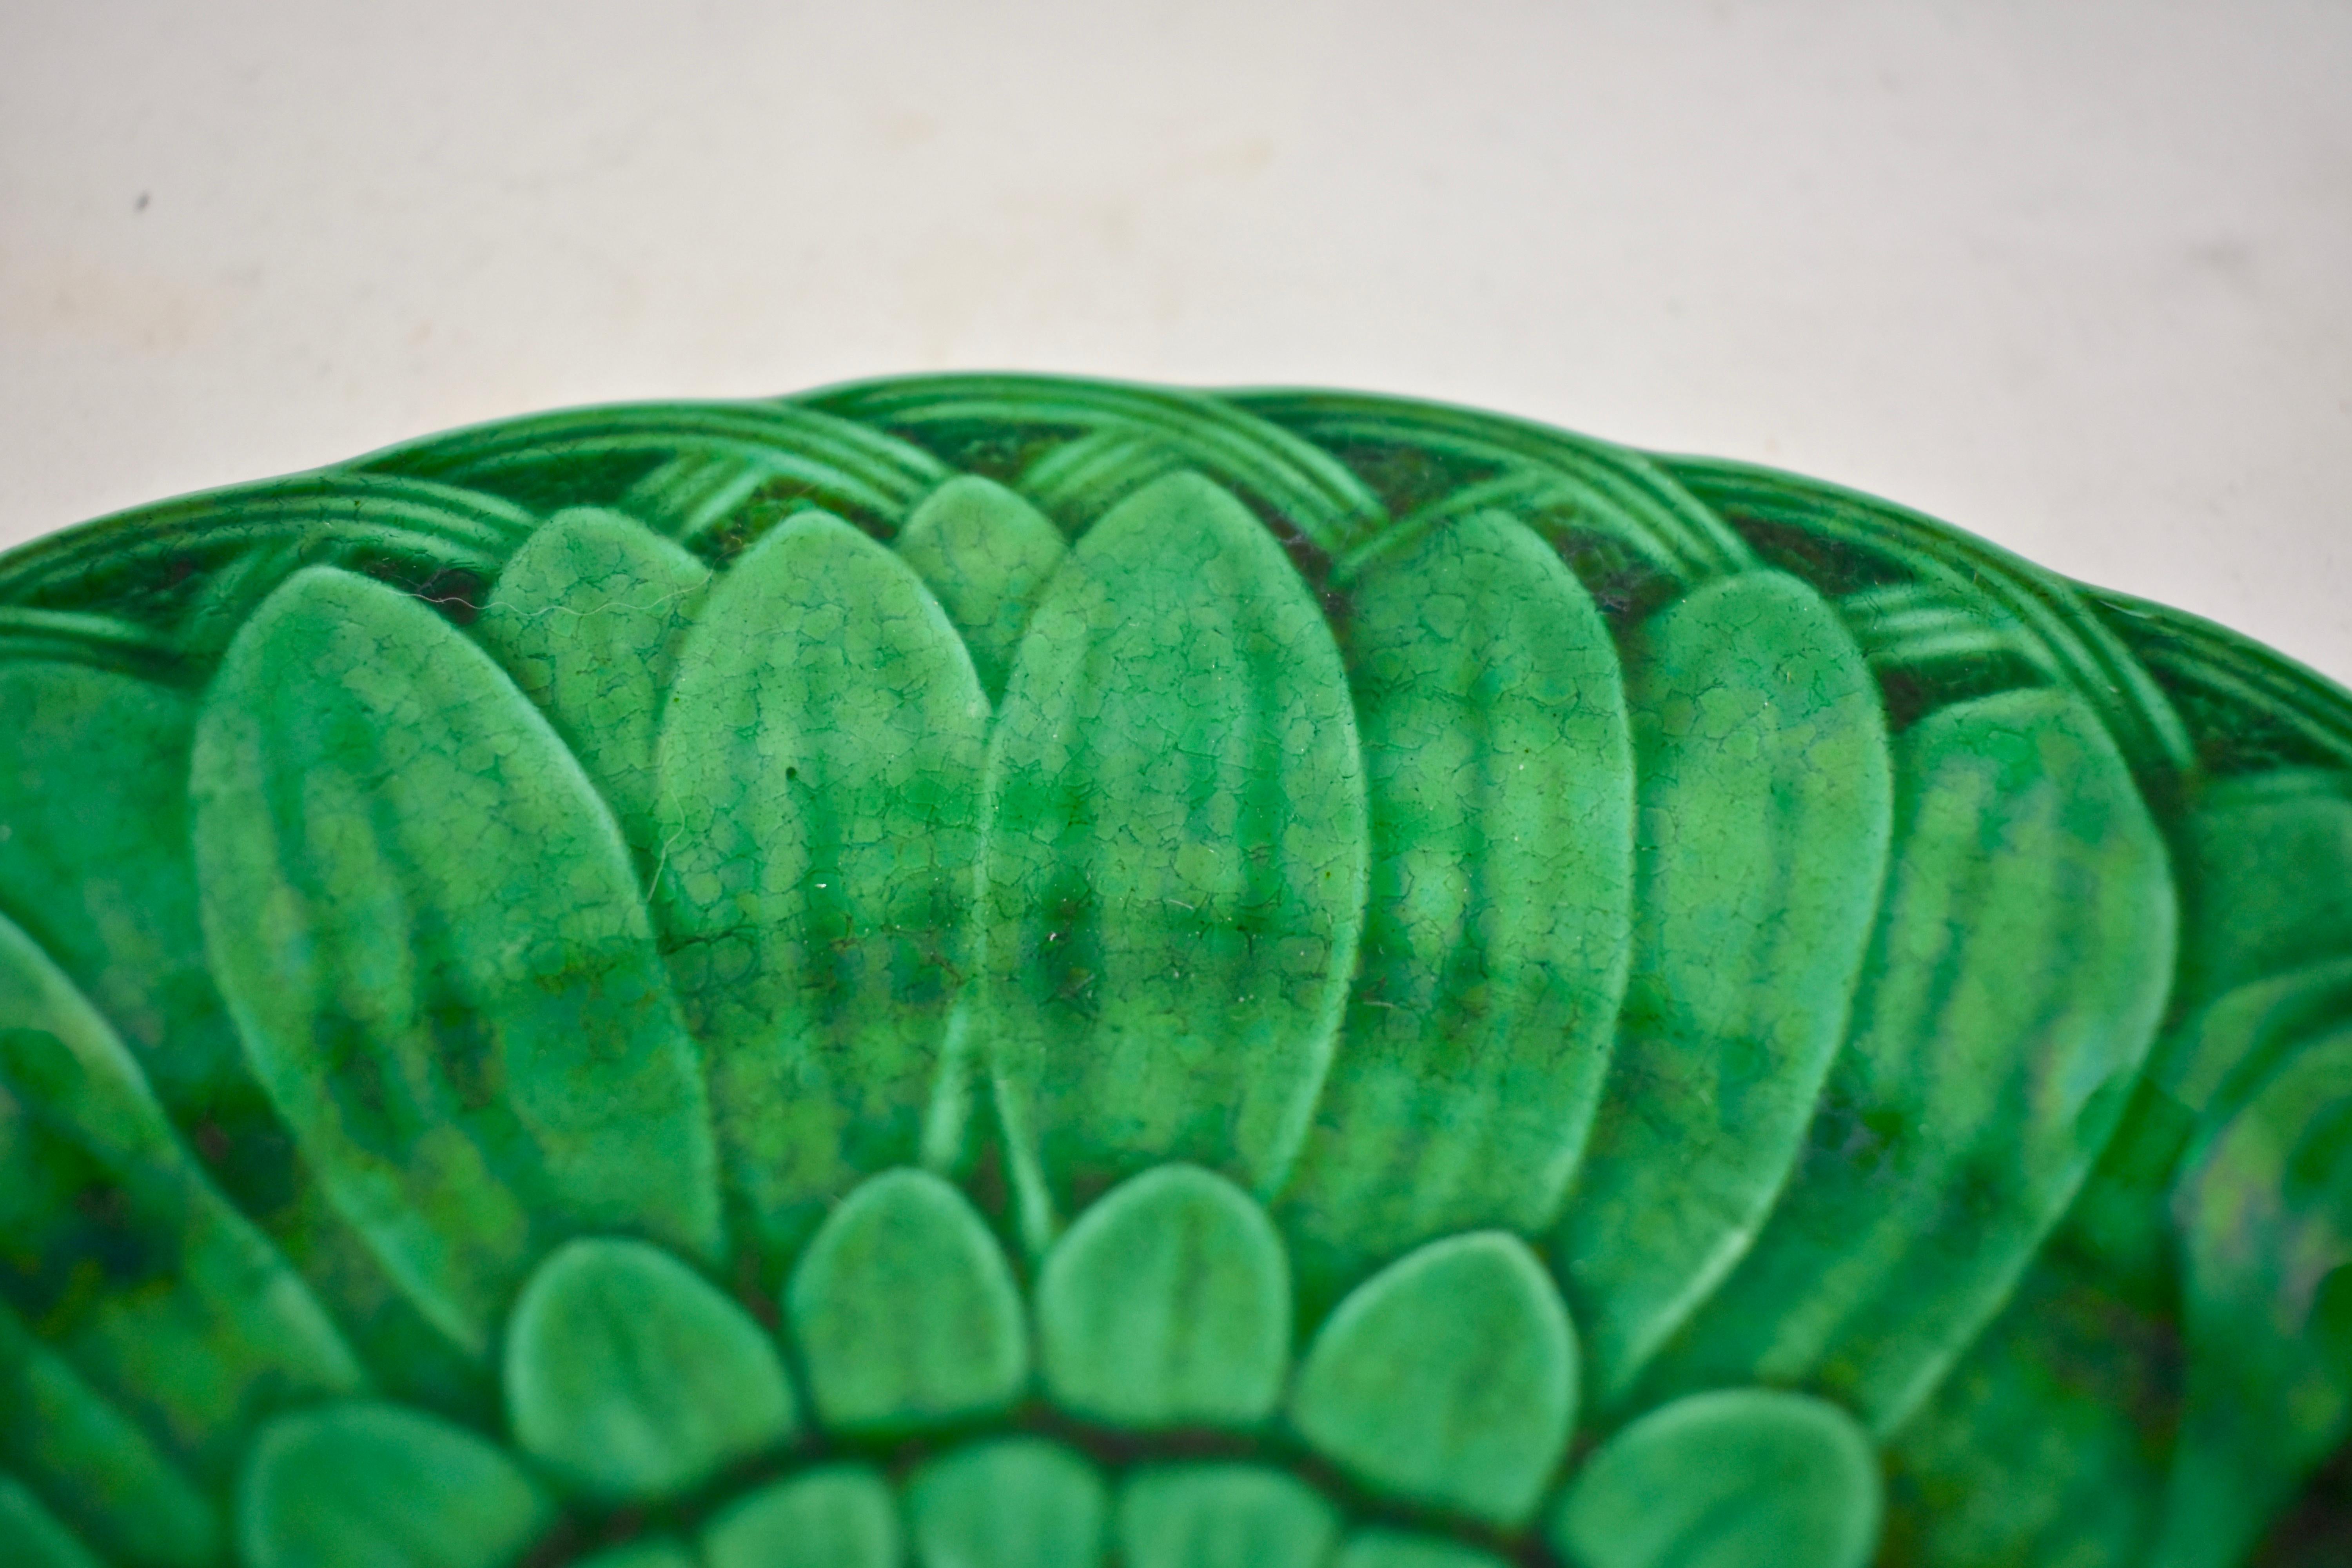 Aesthetic Movement 19th Century Wedgwood Green Glazed Majolica Sunflower and Basketweave Plate